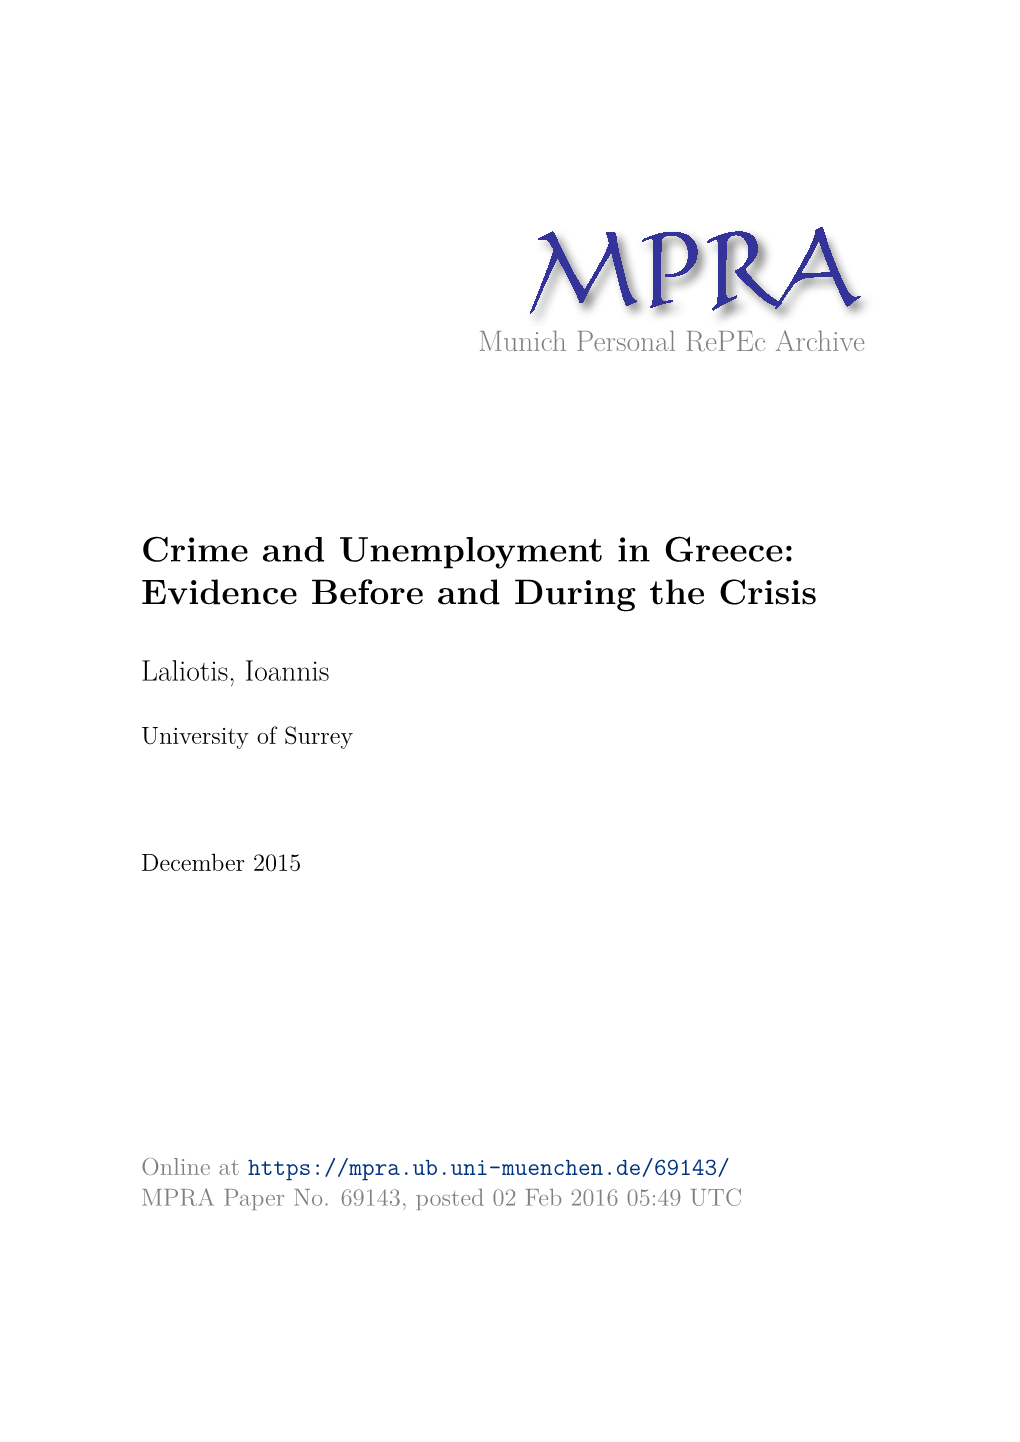 Crime and Unemployment in Greece: Evidence Before and During the Crisis